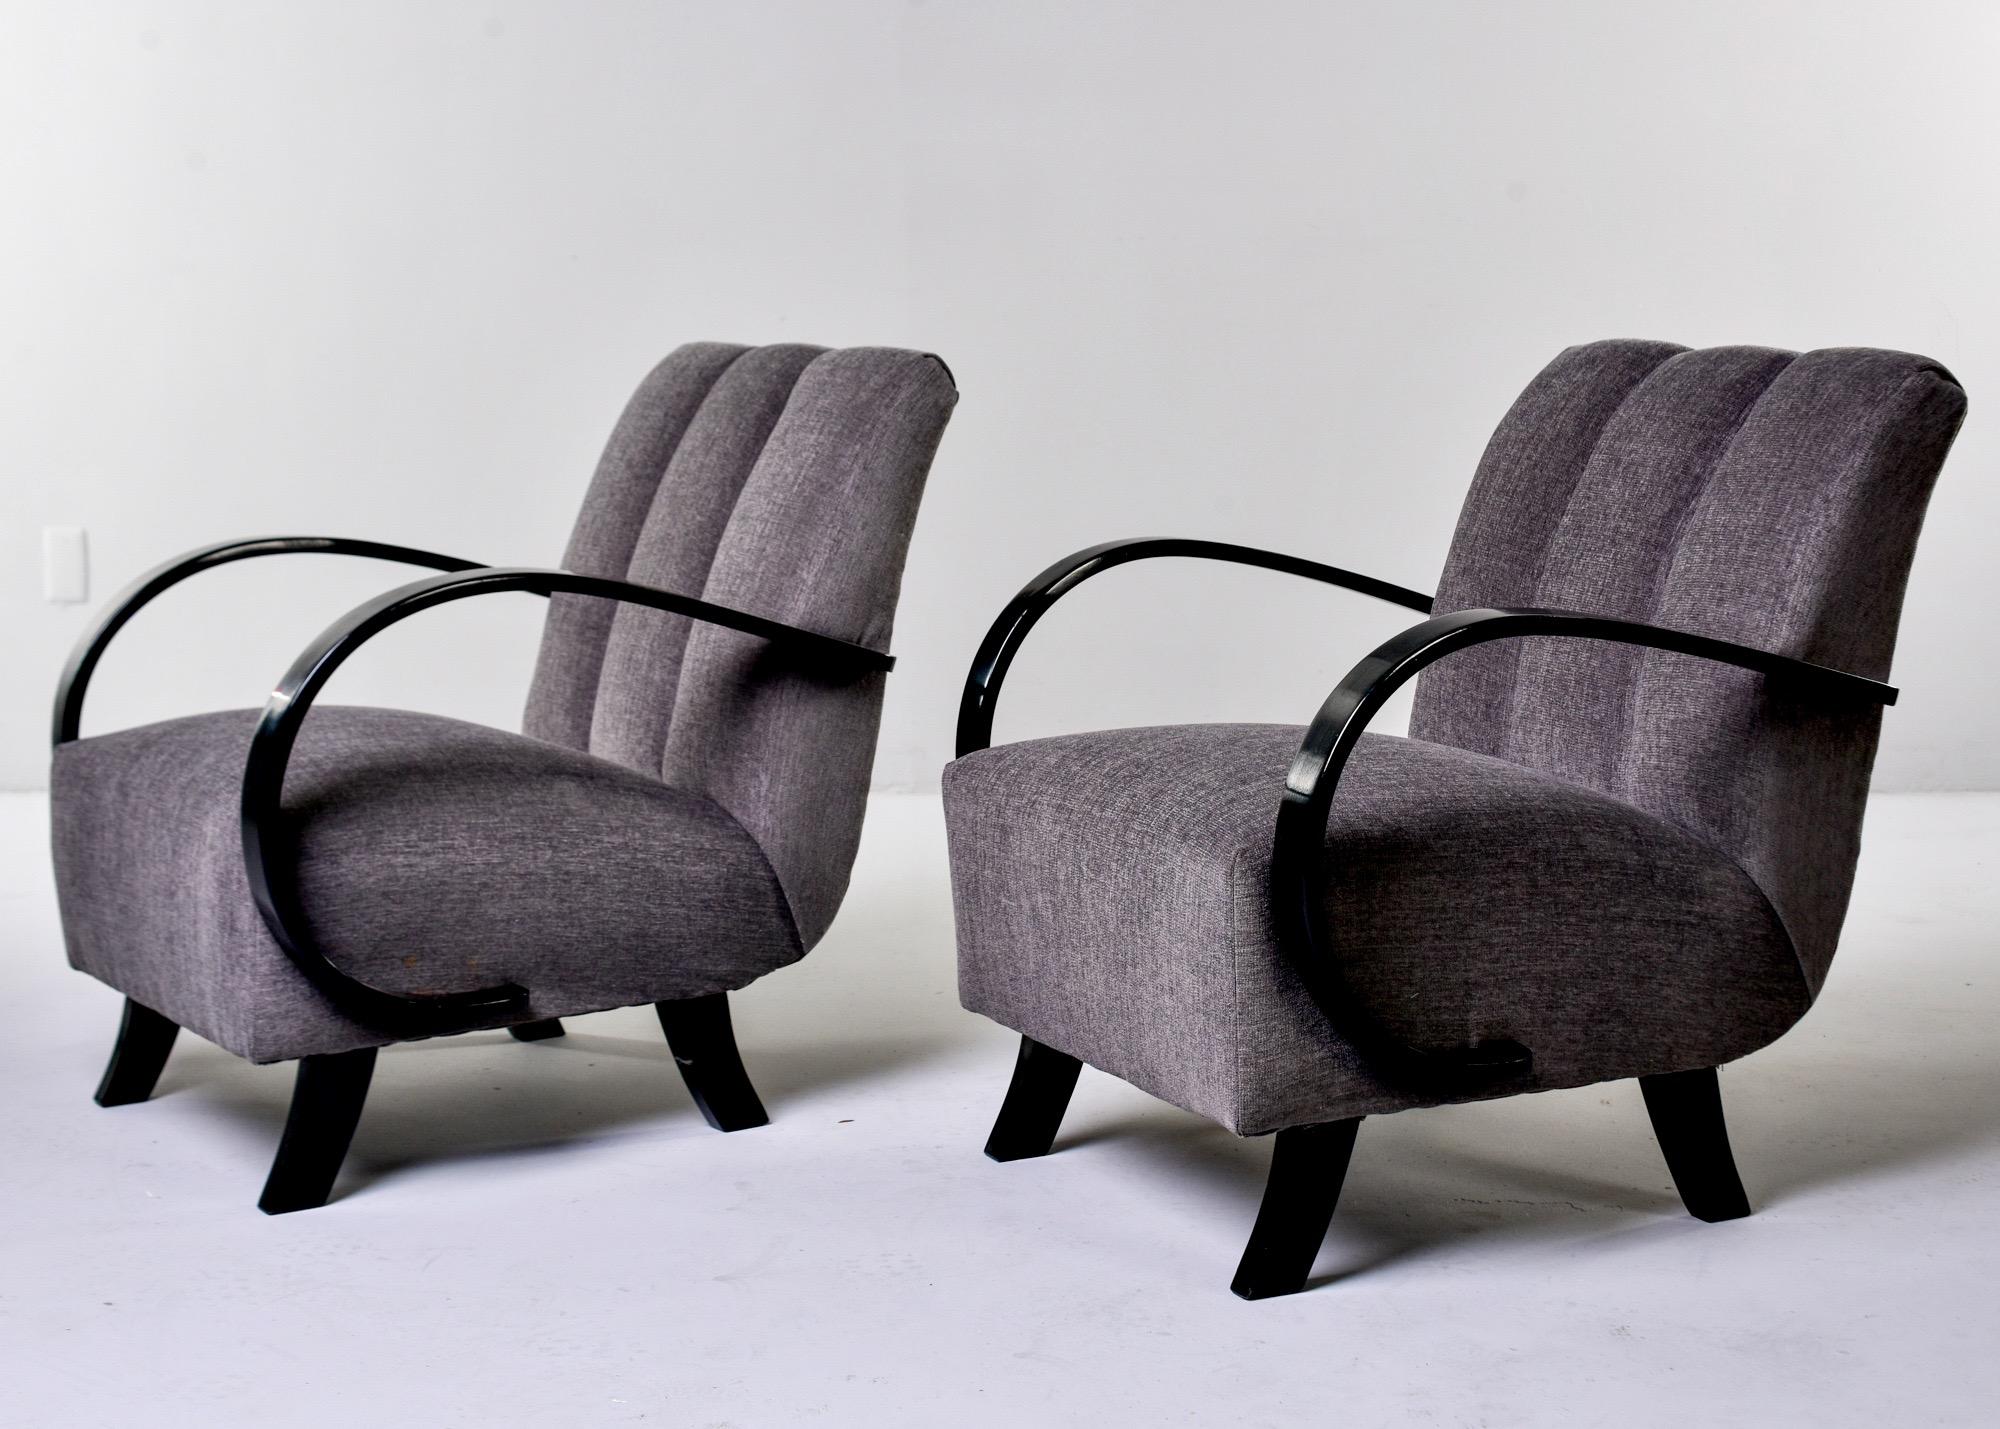 Czech Pair of Jindrich Halabala Chairs with Ebonized Frames and New Upholstery